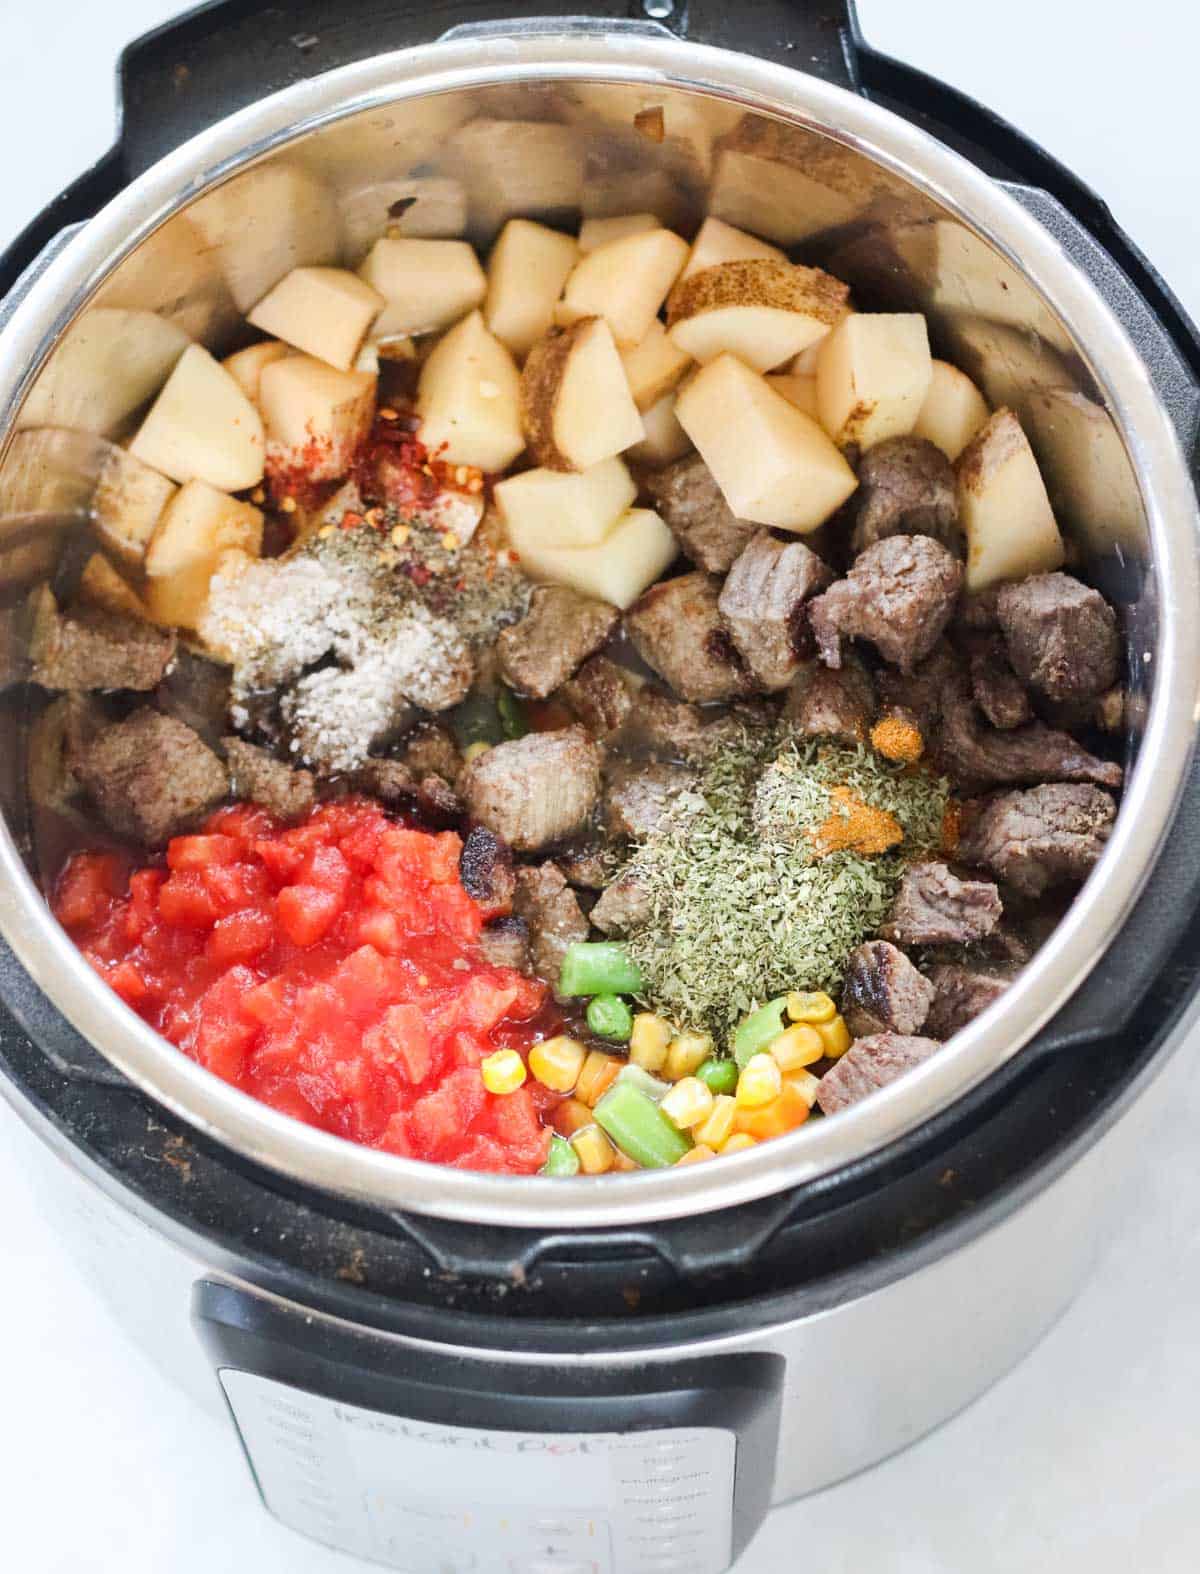 instant pot filled with potatoes, canned tomatoes, frozen mixed veggies, cooked beef, and spices before cooking